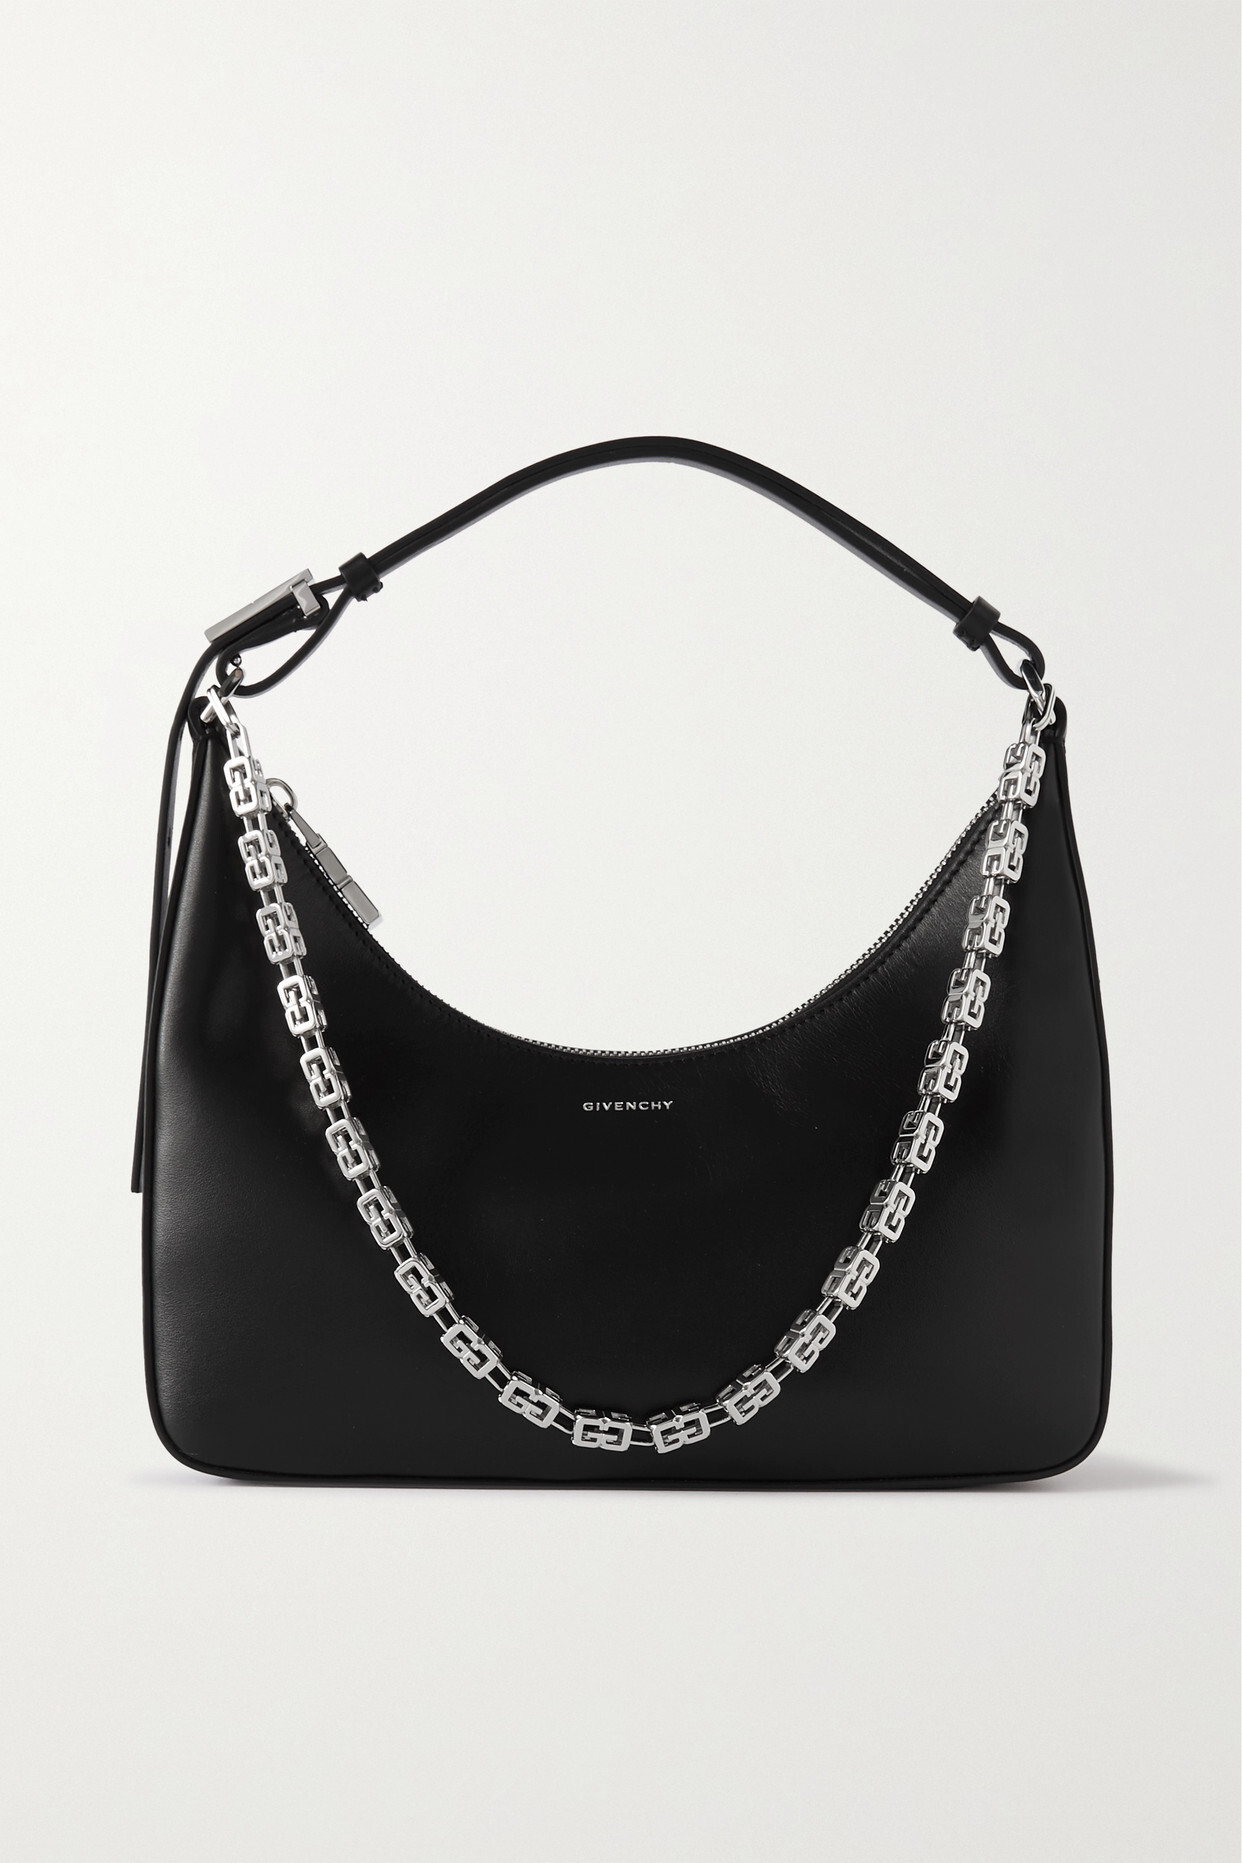 Givenchy - Moon Cut Out Small Chain-embellished Leather Shoulder Bag - Black